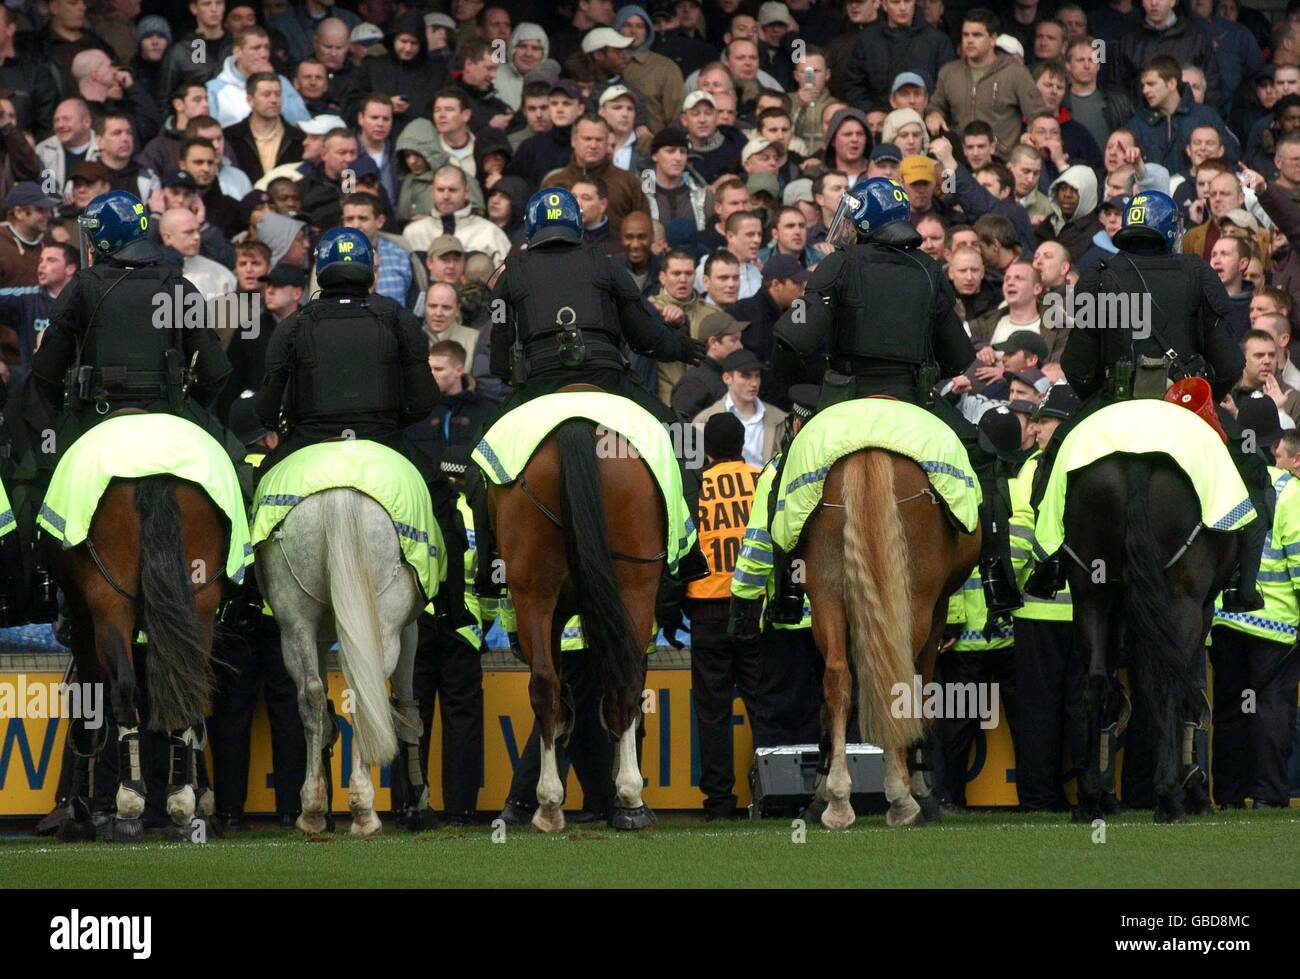 Soccer - Nationwide League Division One - Millwall v West Ham United. Police horses contain the West Ham fans Stock Photo